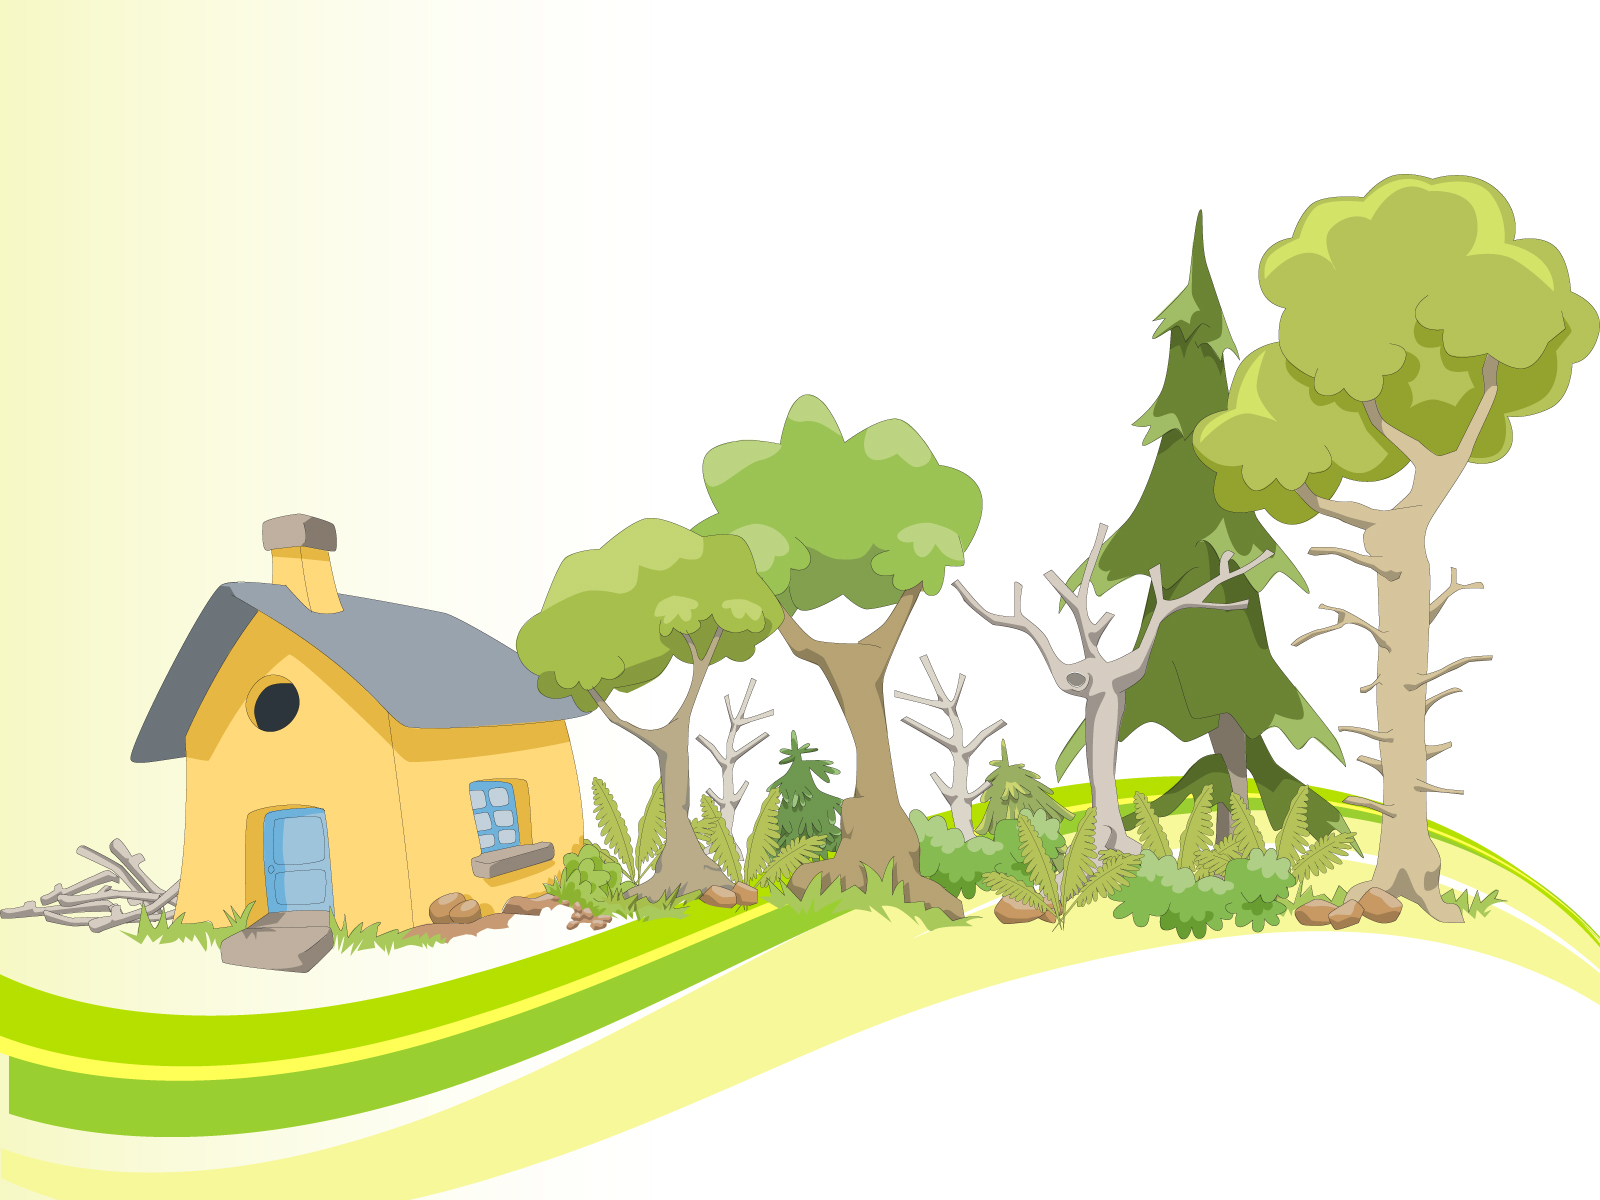 Vineyards, Orchards and Wooden House Backgrounds - Cartoon, Green